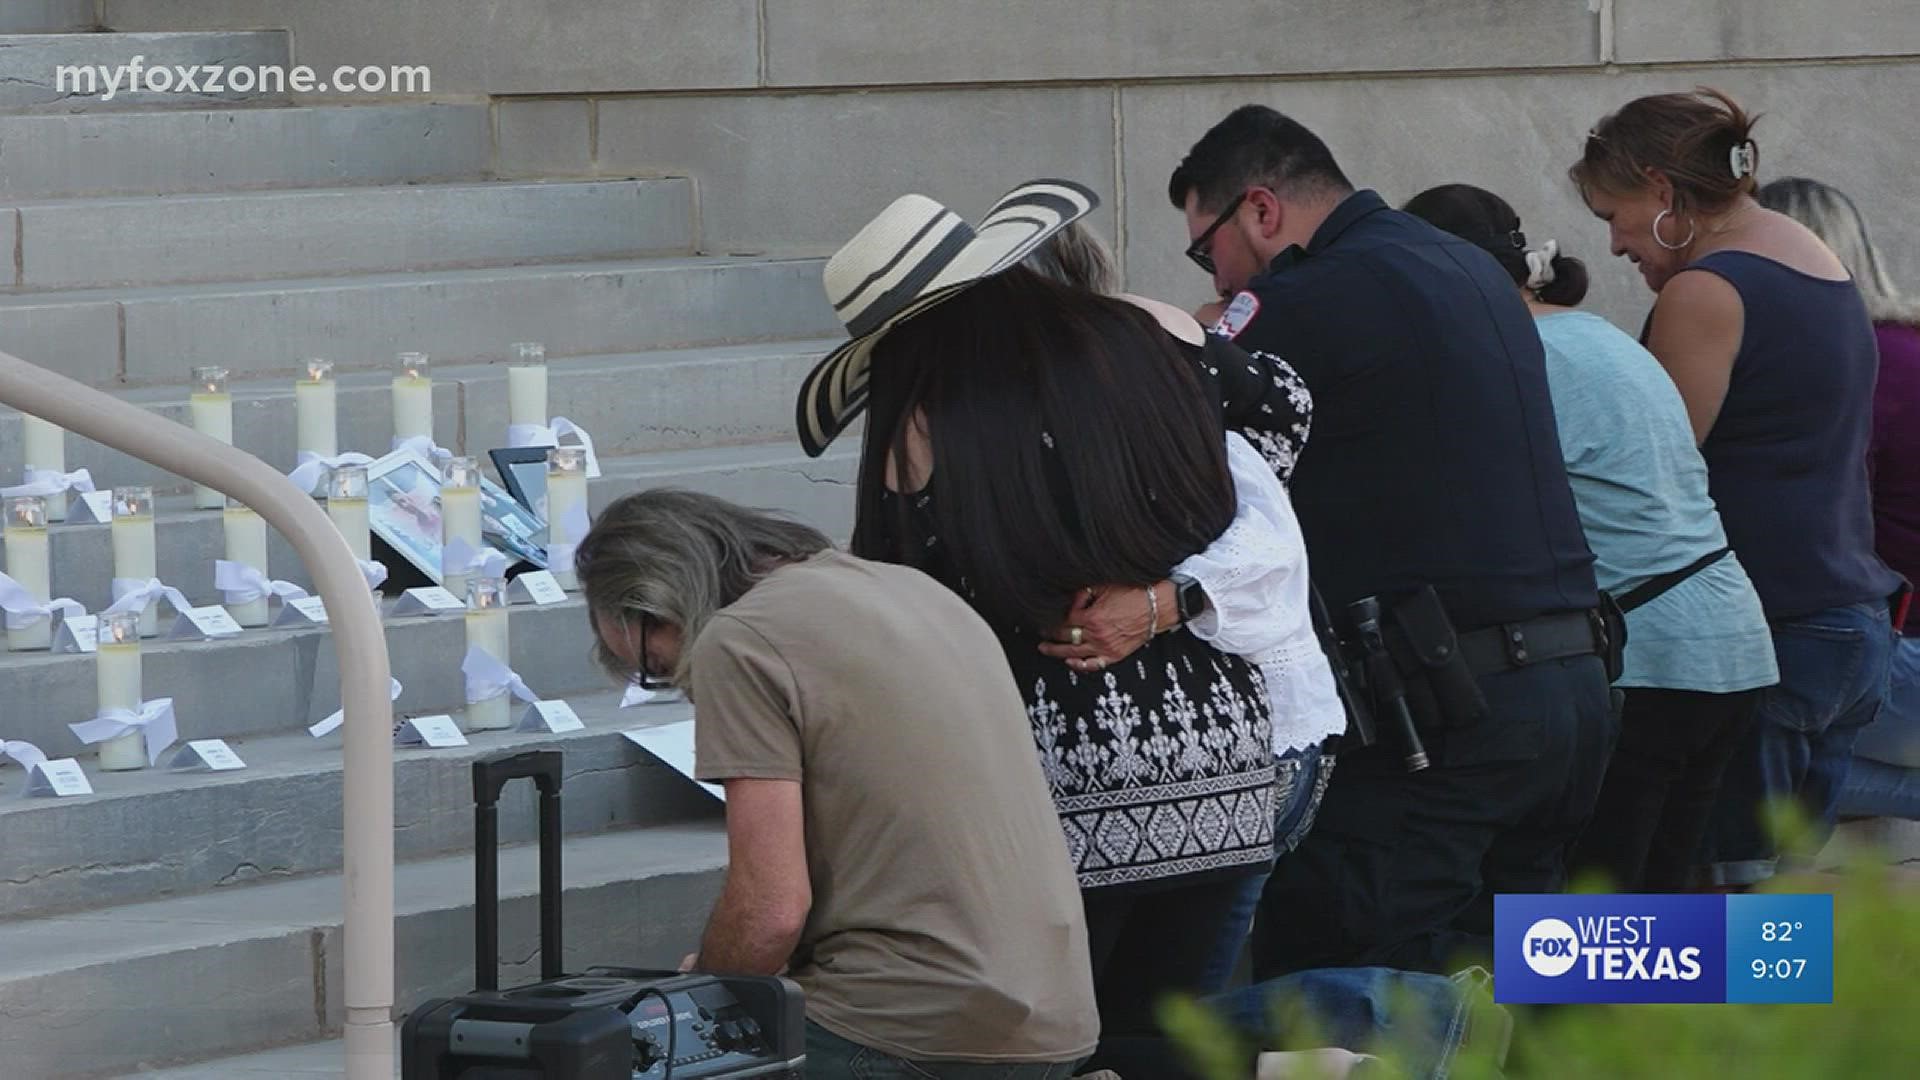 The family members of one of the victims killed in the Uvalde shooting were present.